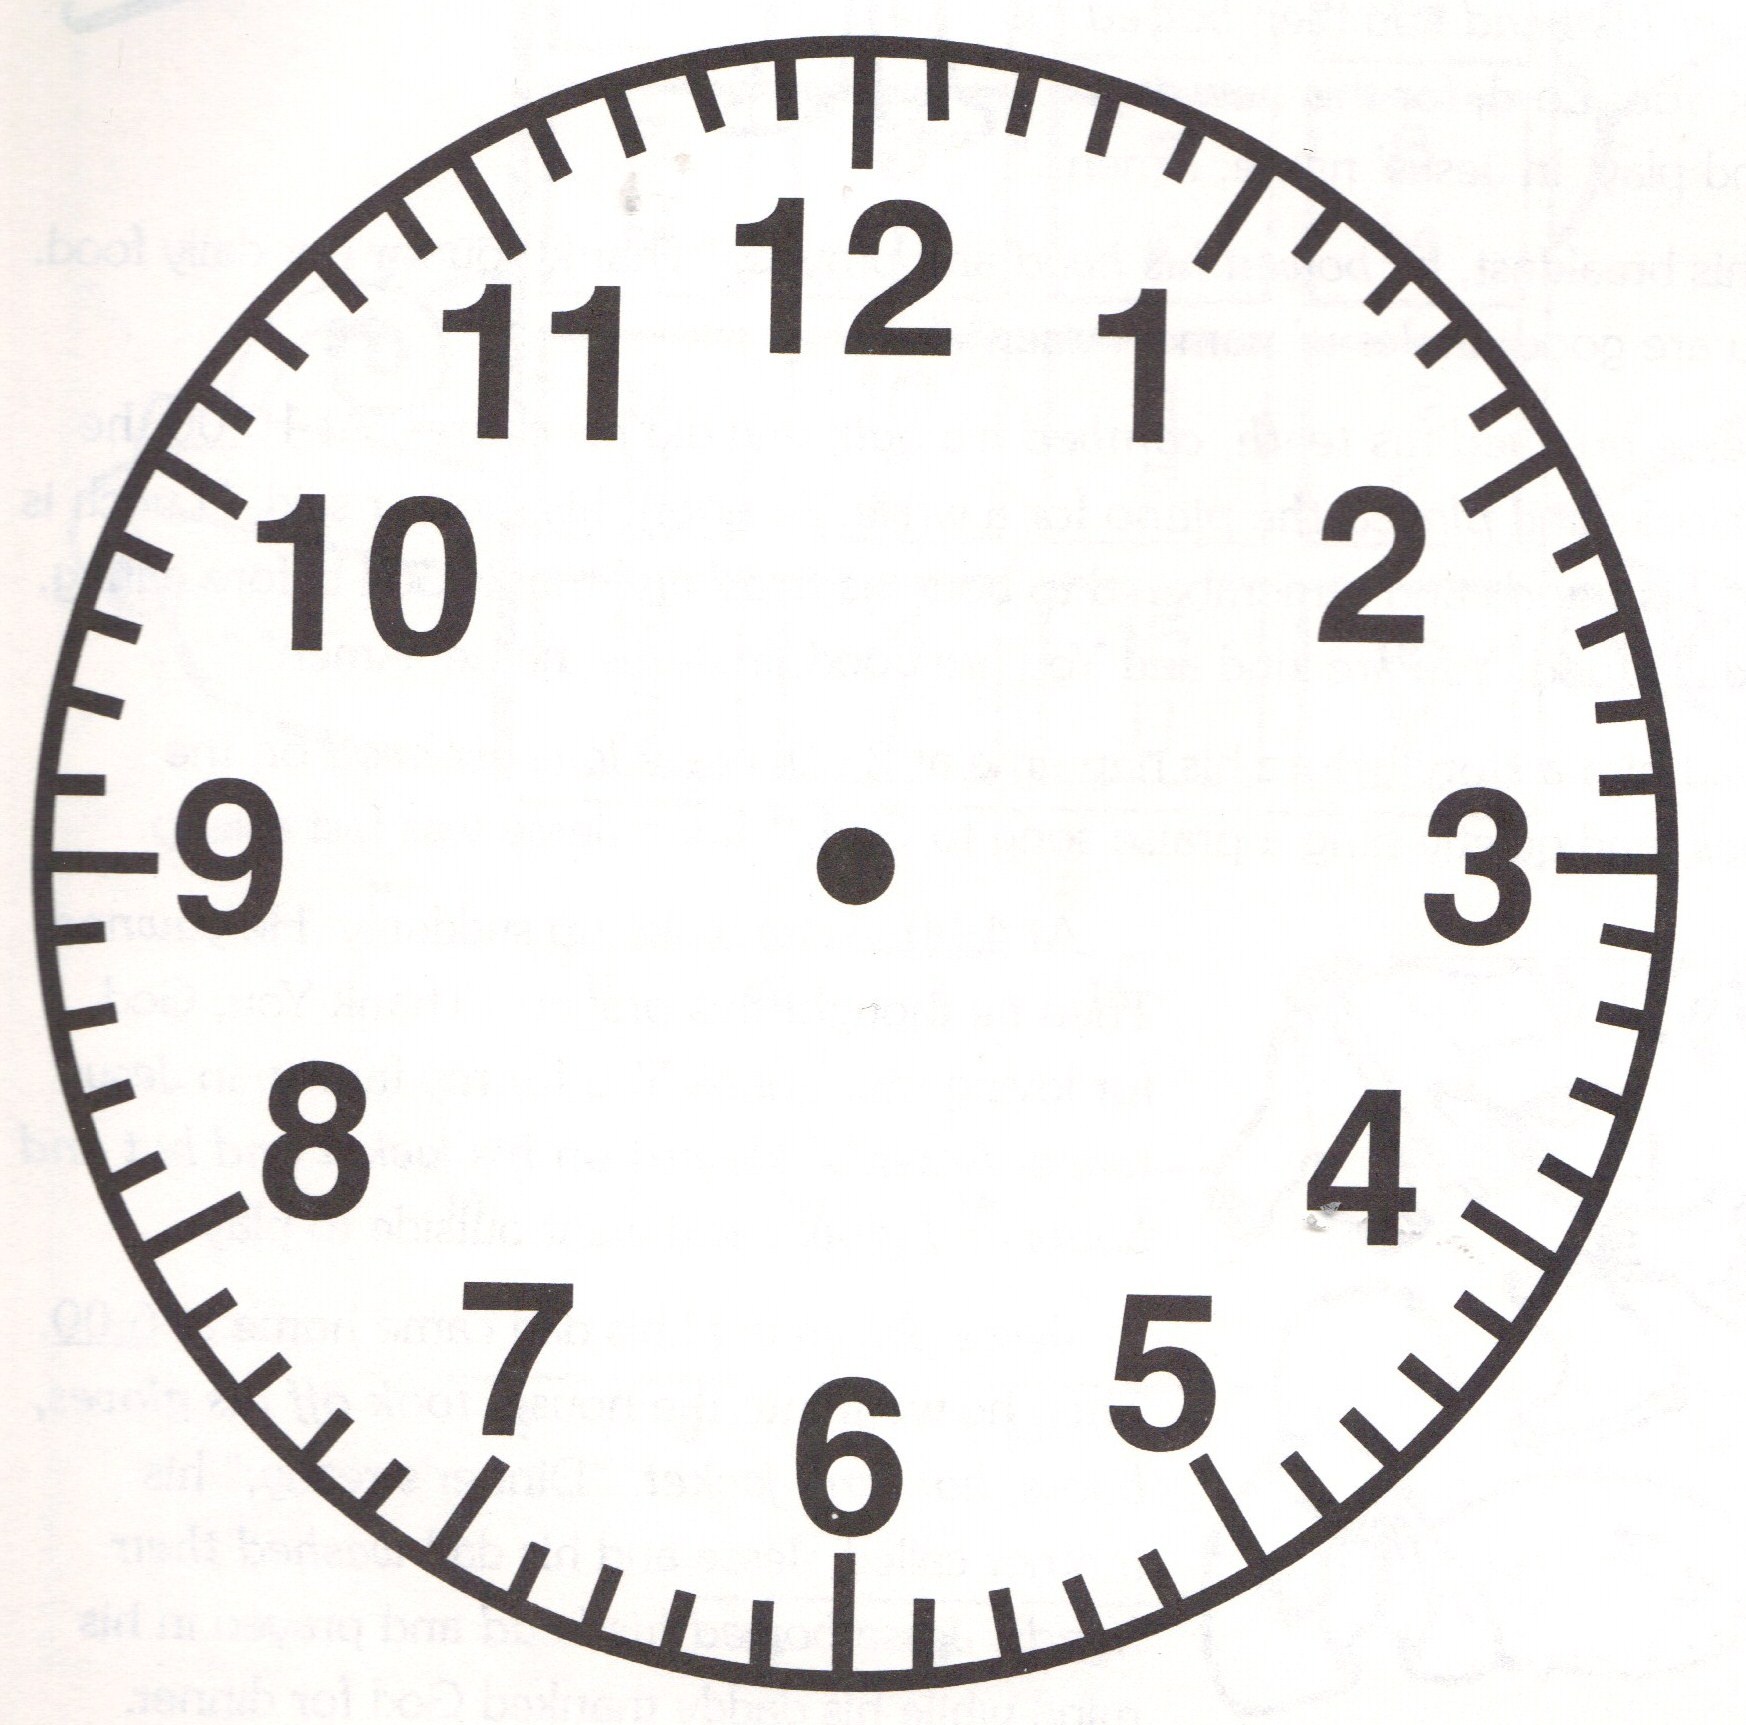 Clock Face with No Hands